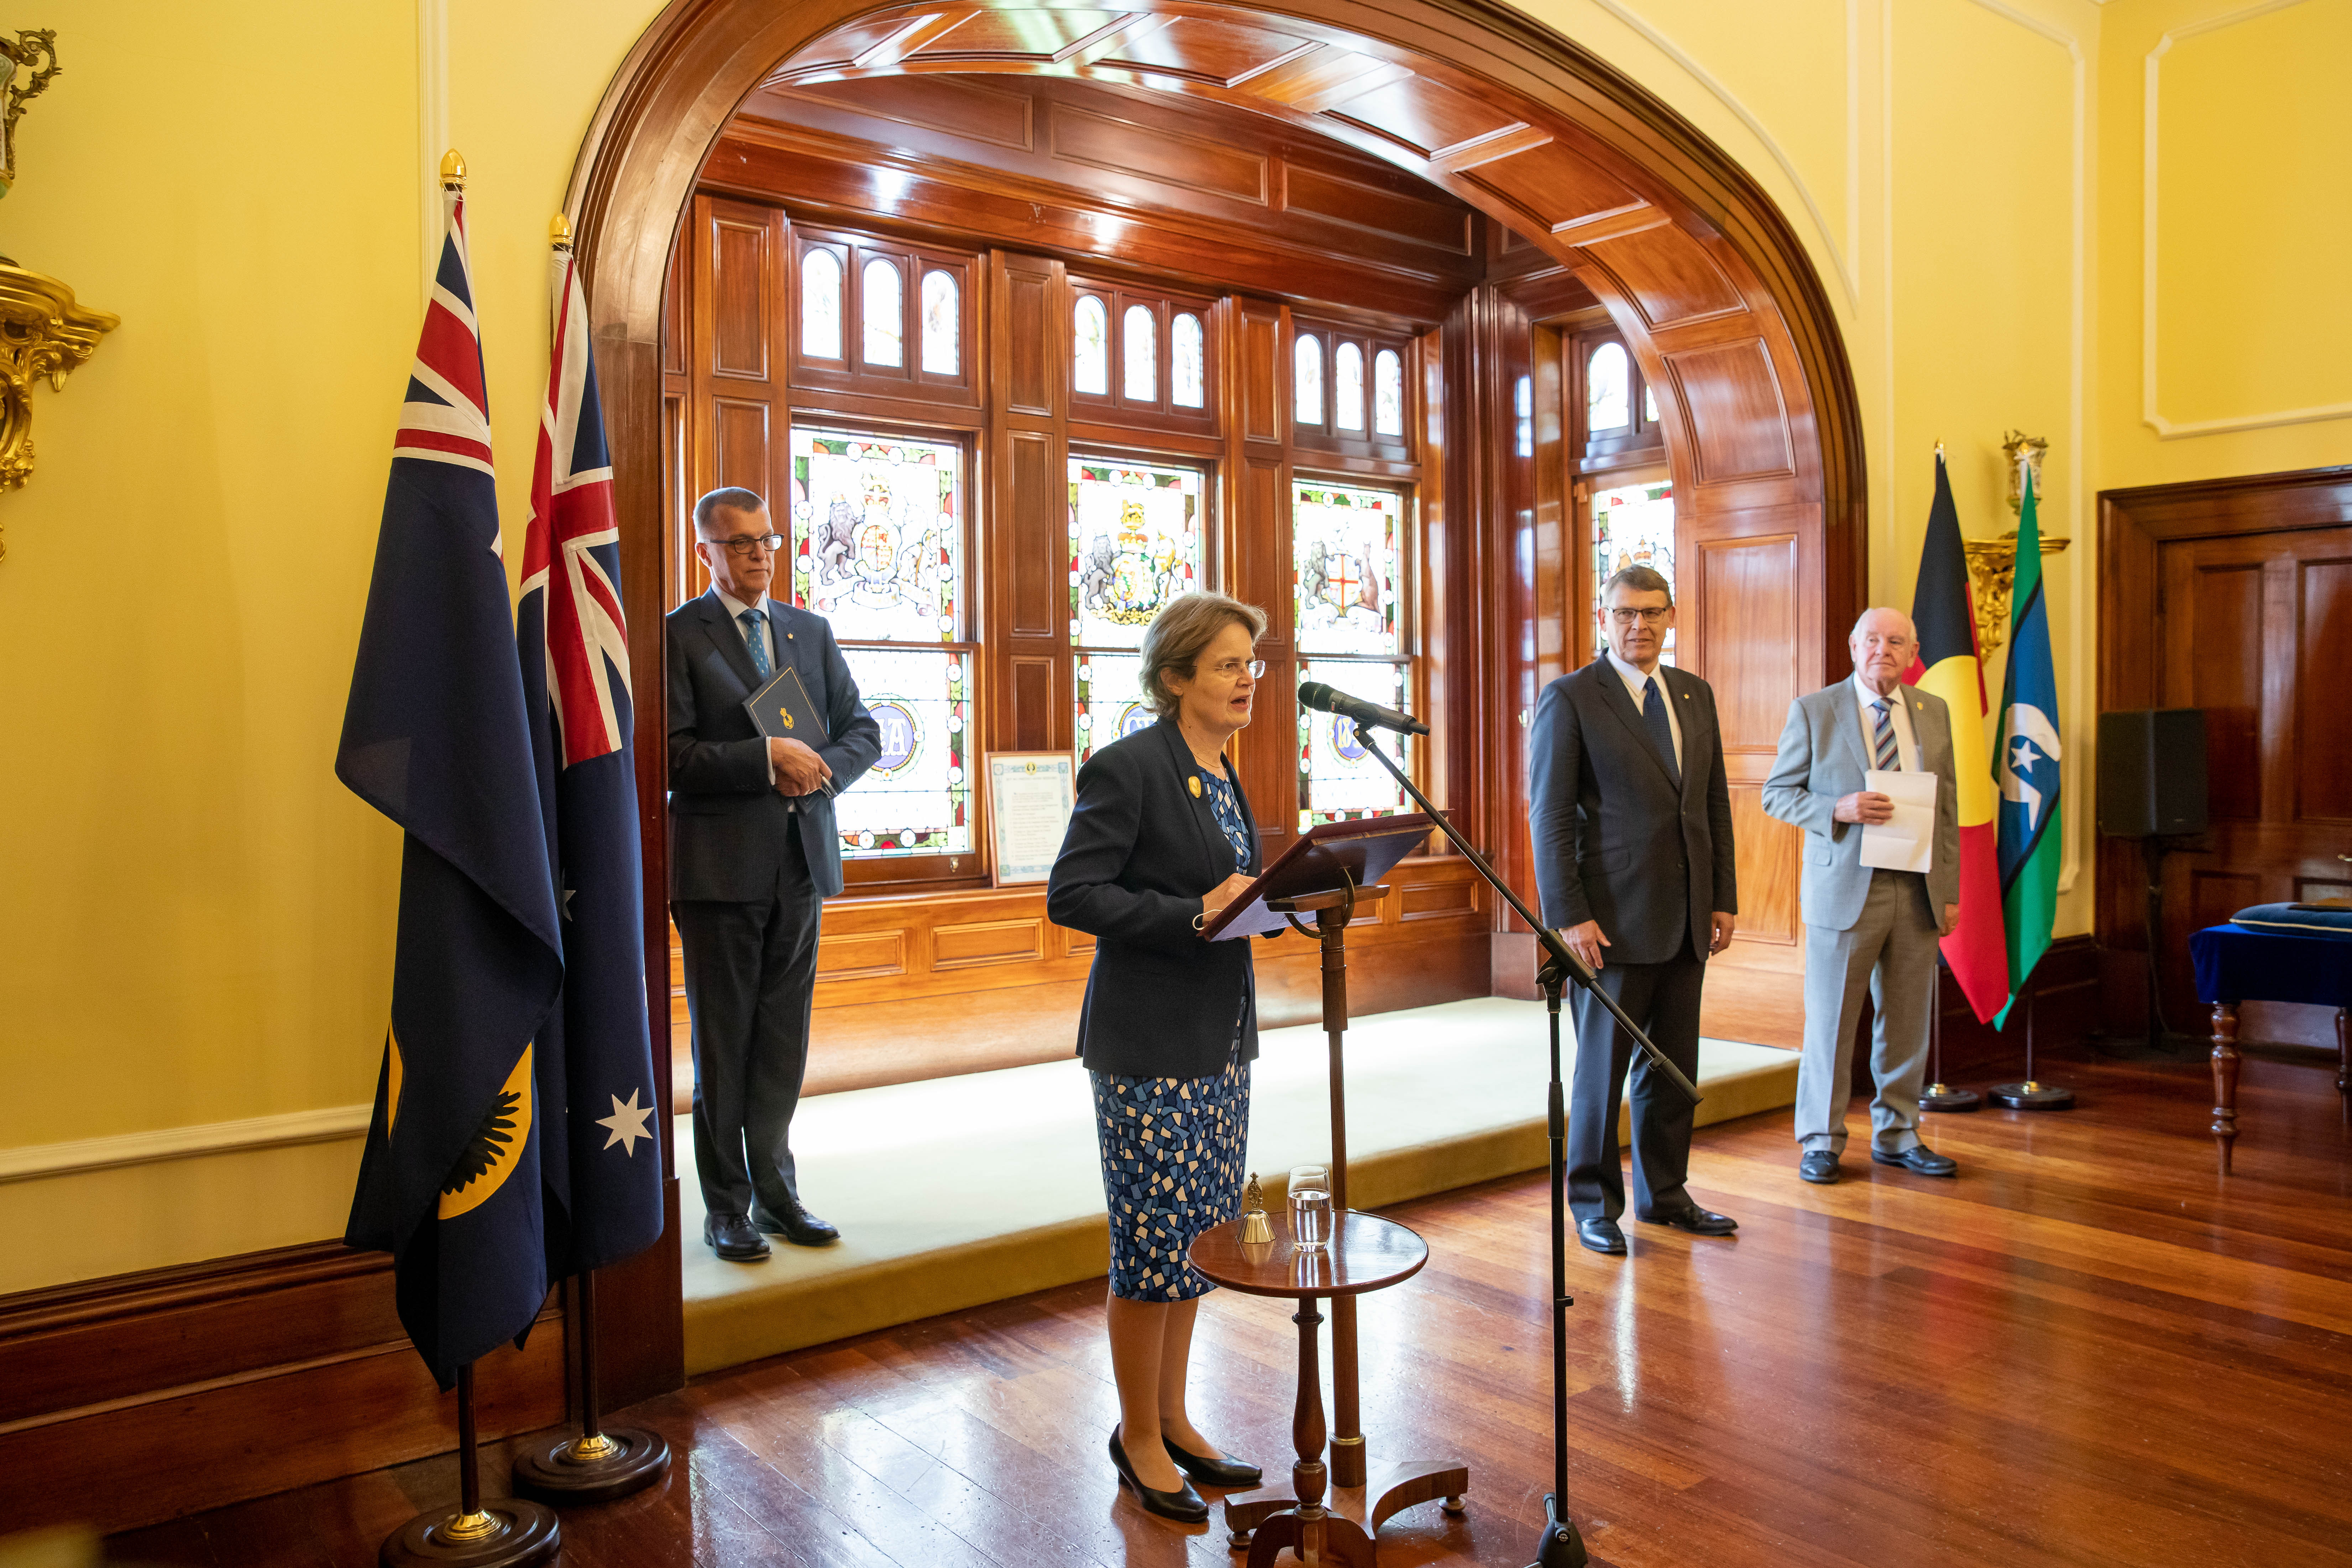 NRF supporters acknowledged for service at Government House event image